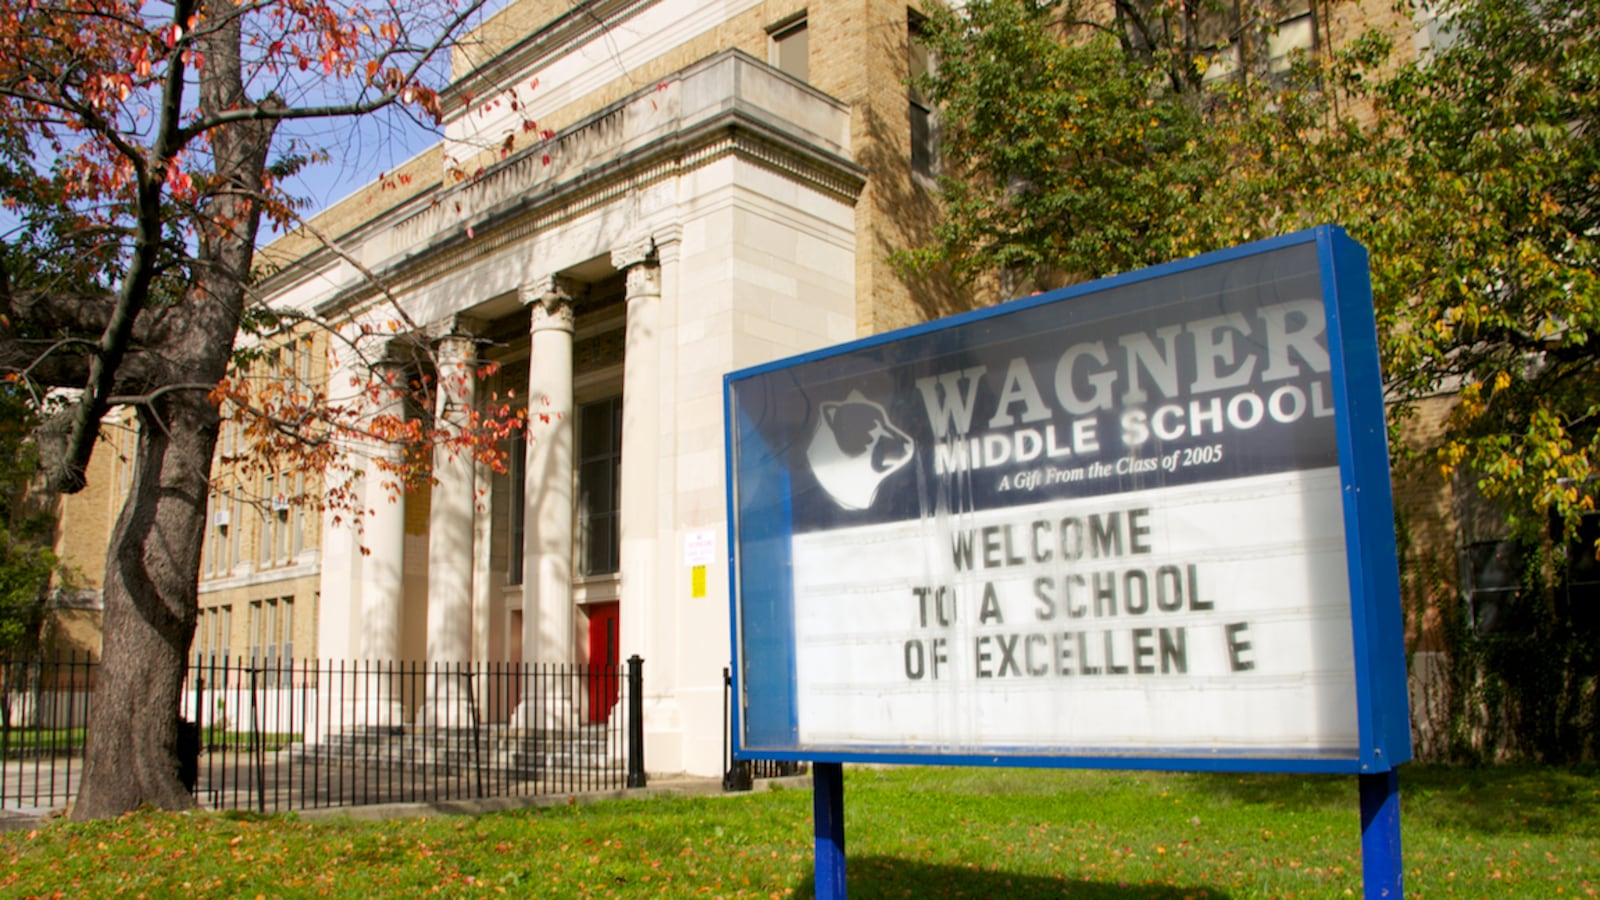 Exterior of Wagner middle school.